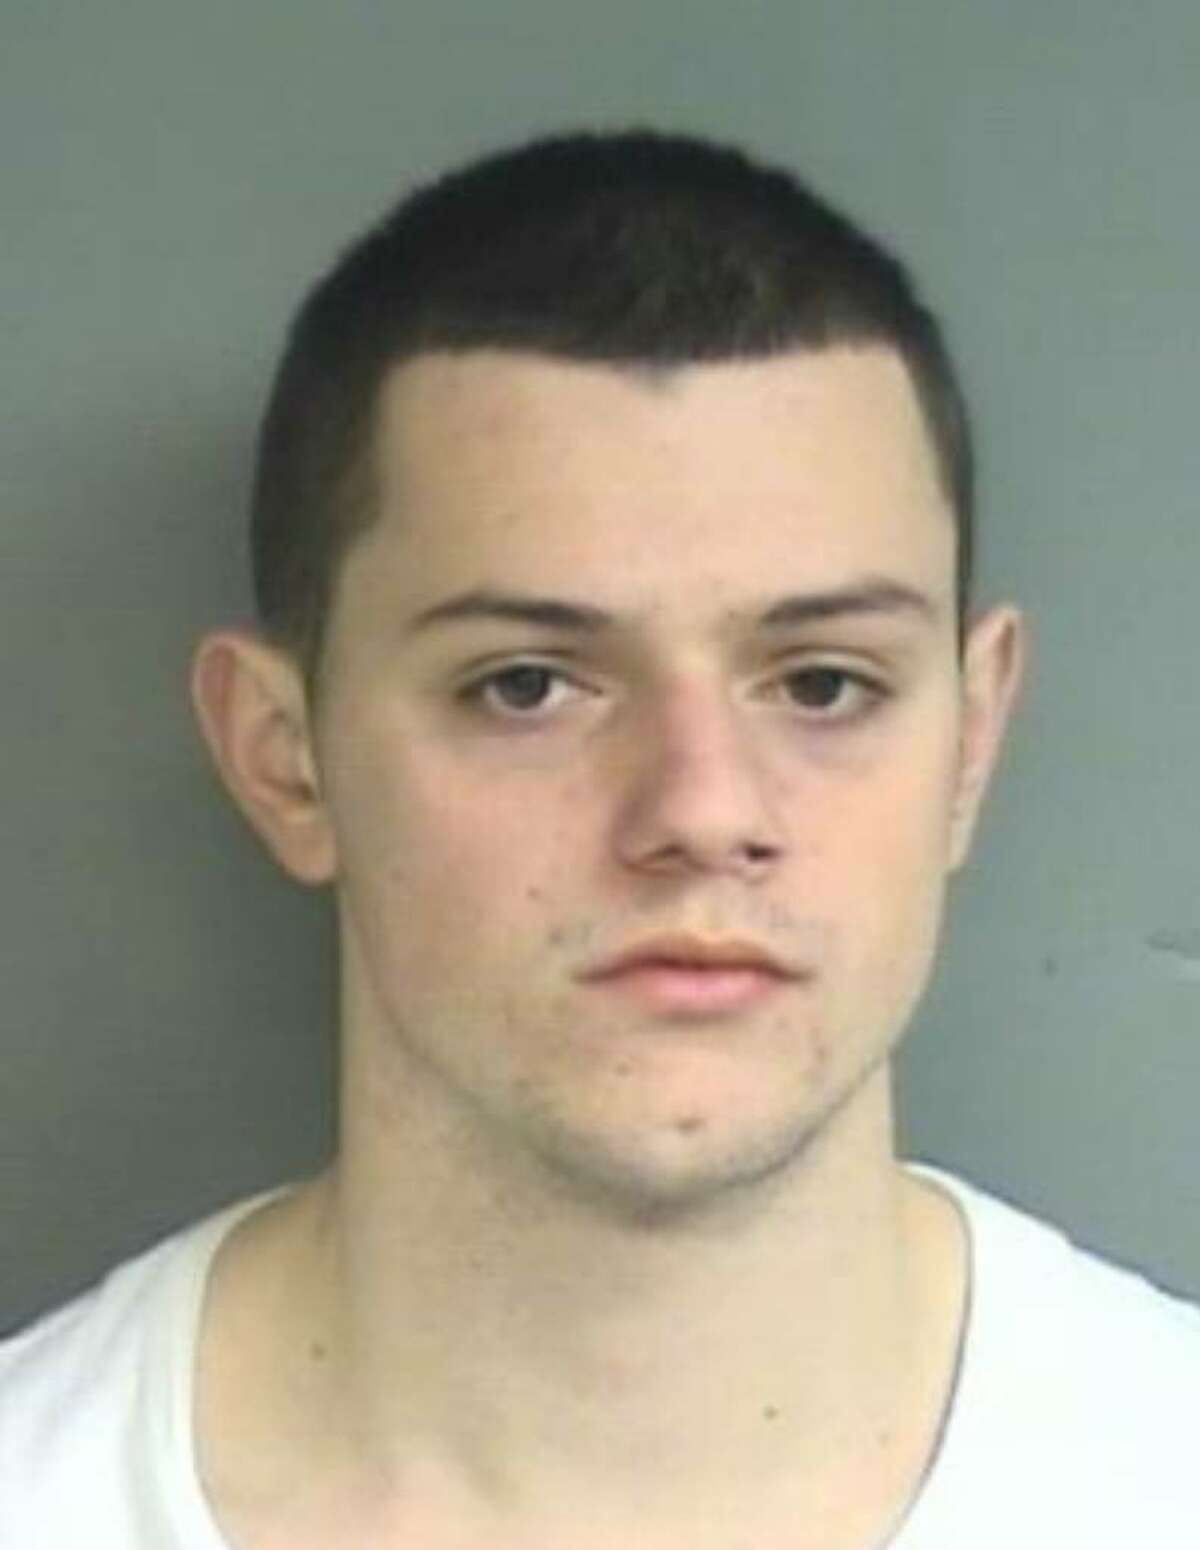 Police photo of Nik Gjuraj. Nik Gjuraj, 19, of High View Ave., and Eric Diaz, 18, of 106 Crystal St., were arrested Sunday and Monday and each face a long list of felony burglary and larceny charges, said Sgt. Peter diSpagna, commander of the property crimes unit at the Stamford Police Department. The arrests were a result of a police investigation based on anonymous tips and accounts from neighborhood residents, diSpagna said. The hunting rifles were reported stolen during the morning of Nov. 18 when the homeowner's son heard noises in his garage and saw a burglar flee from his